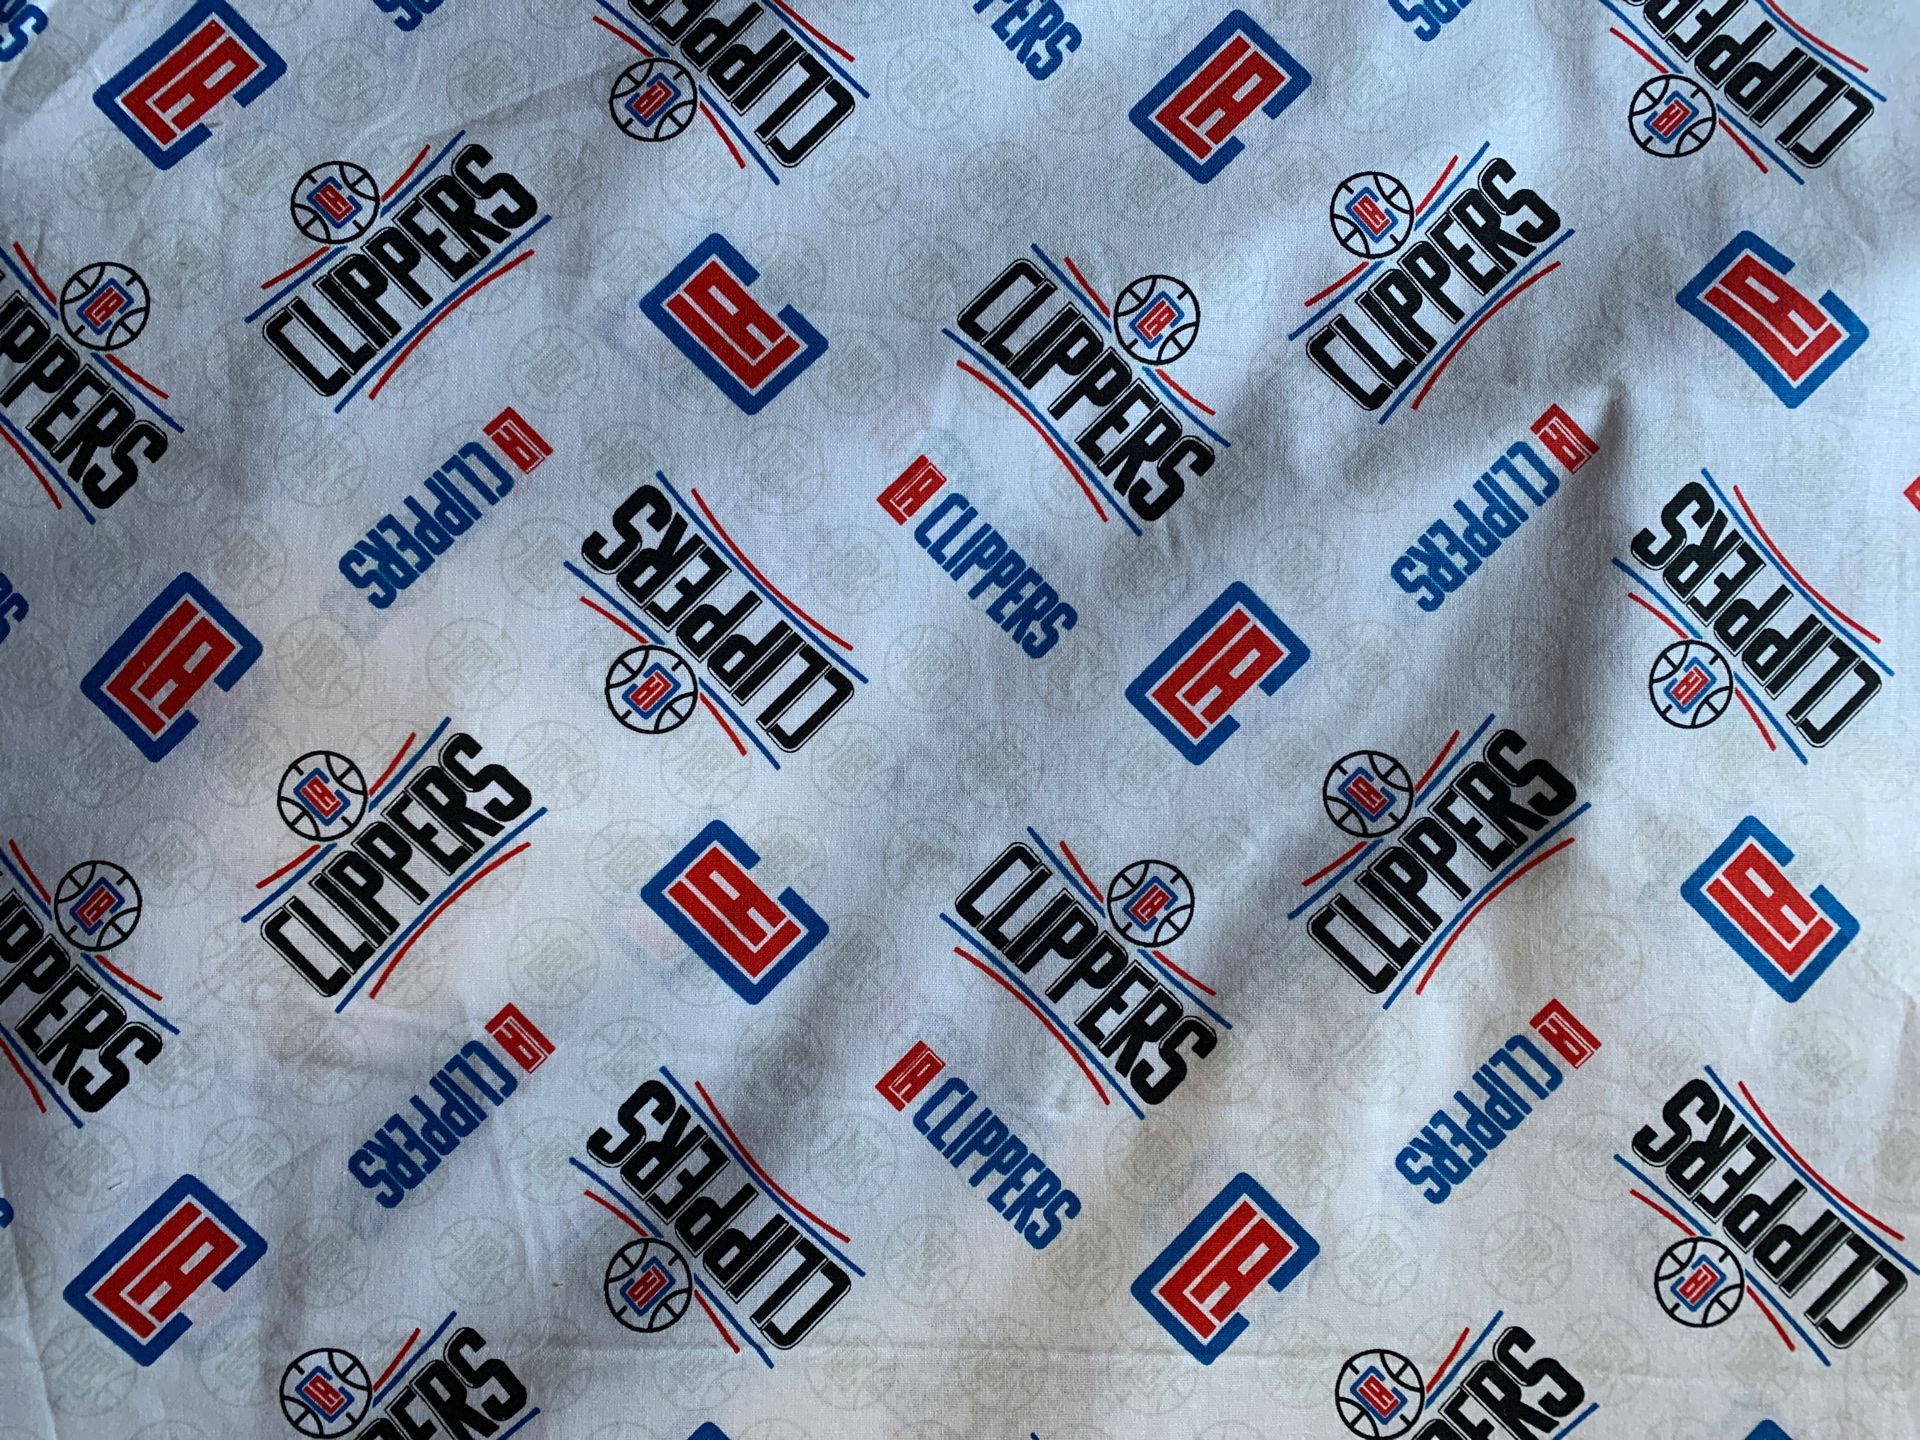 clippers 100% cotton 2 styles cotton100%